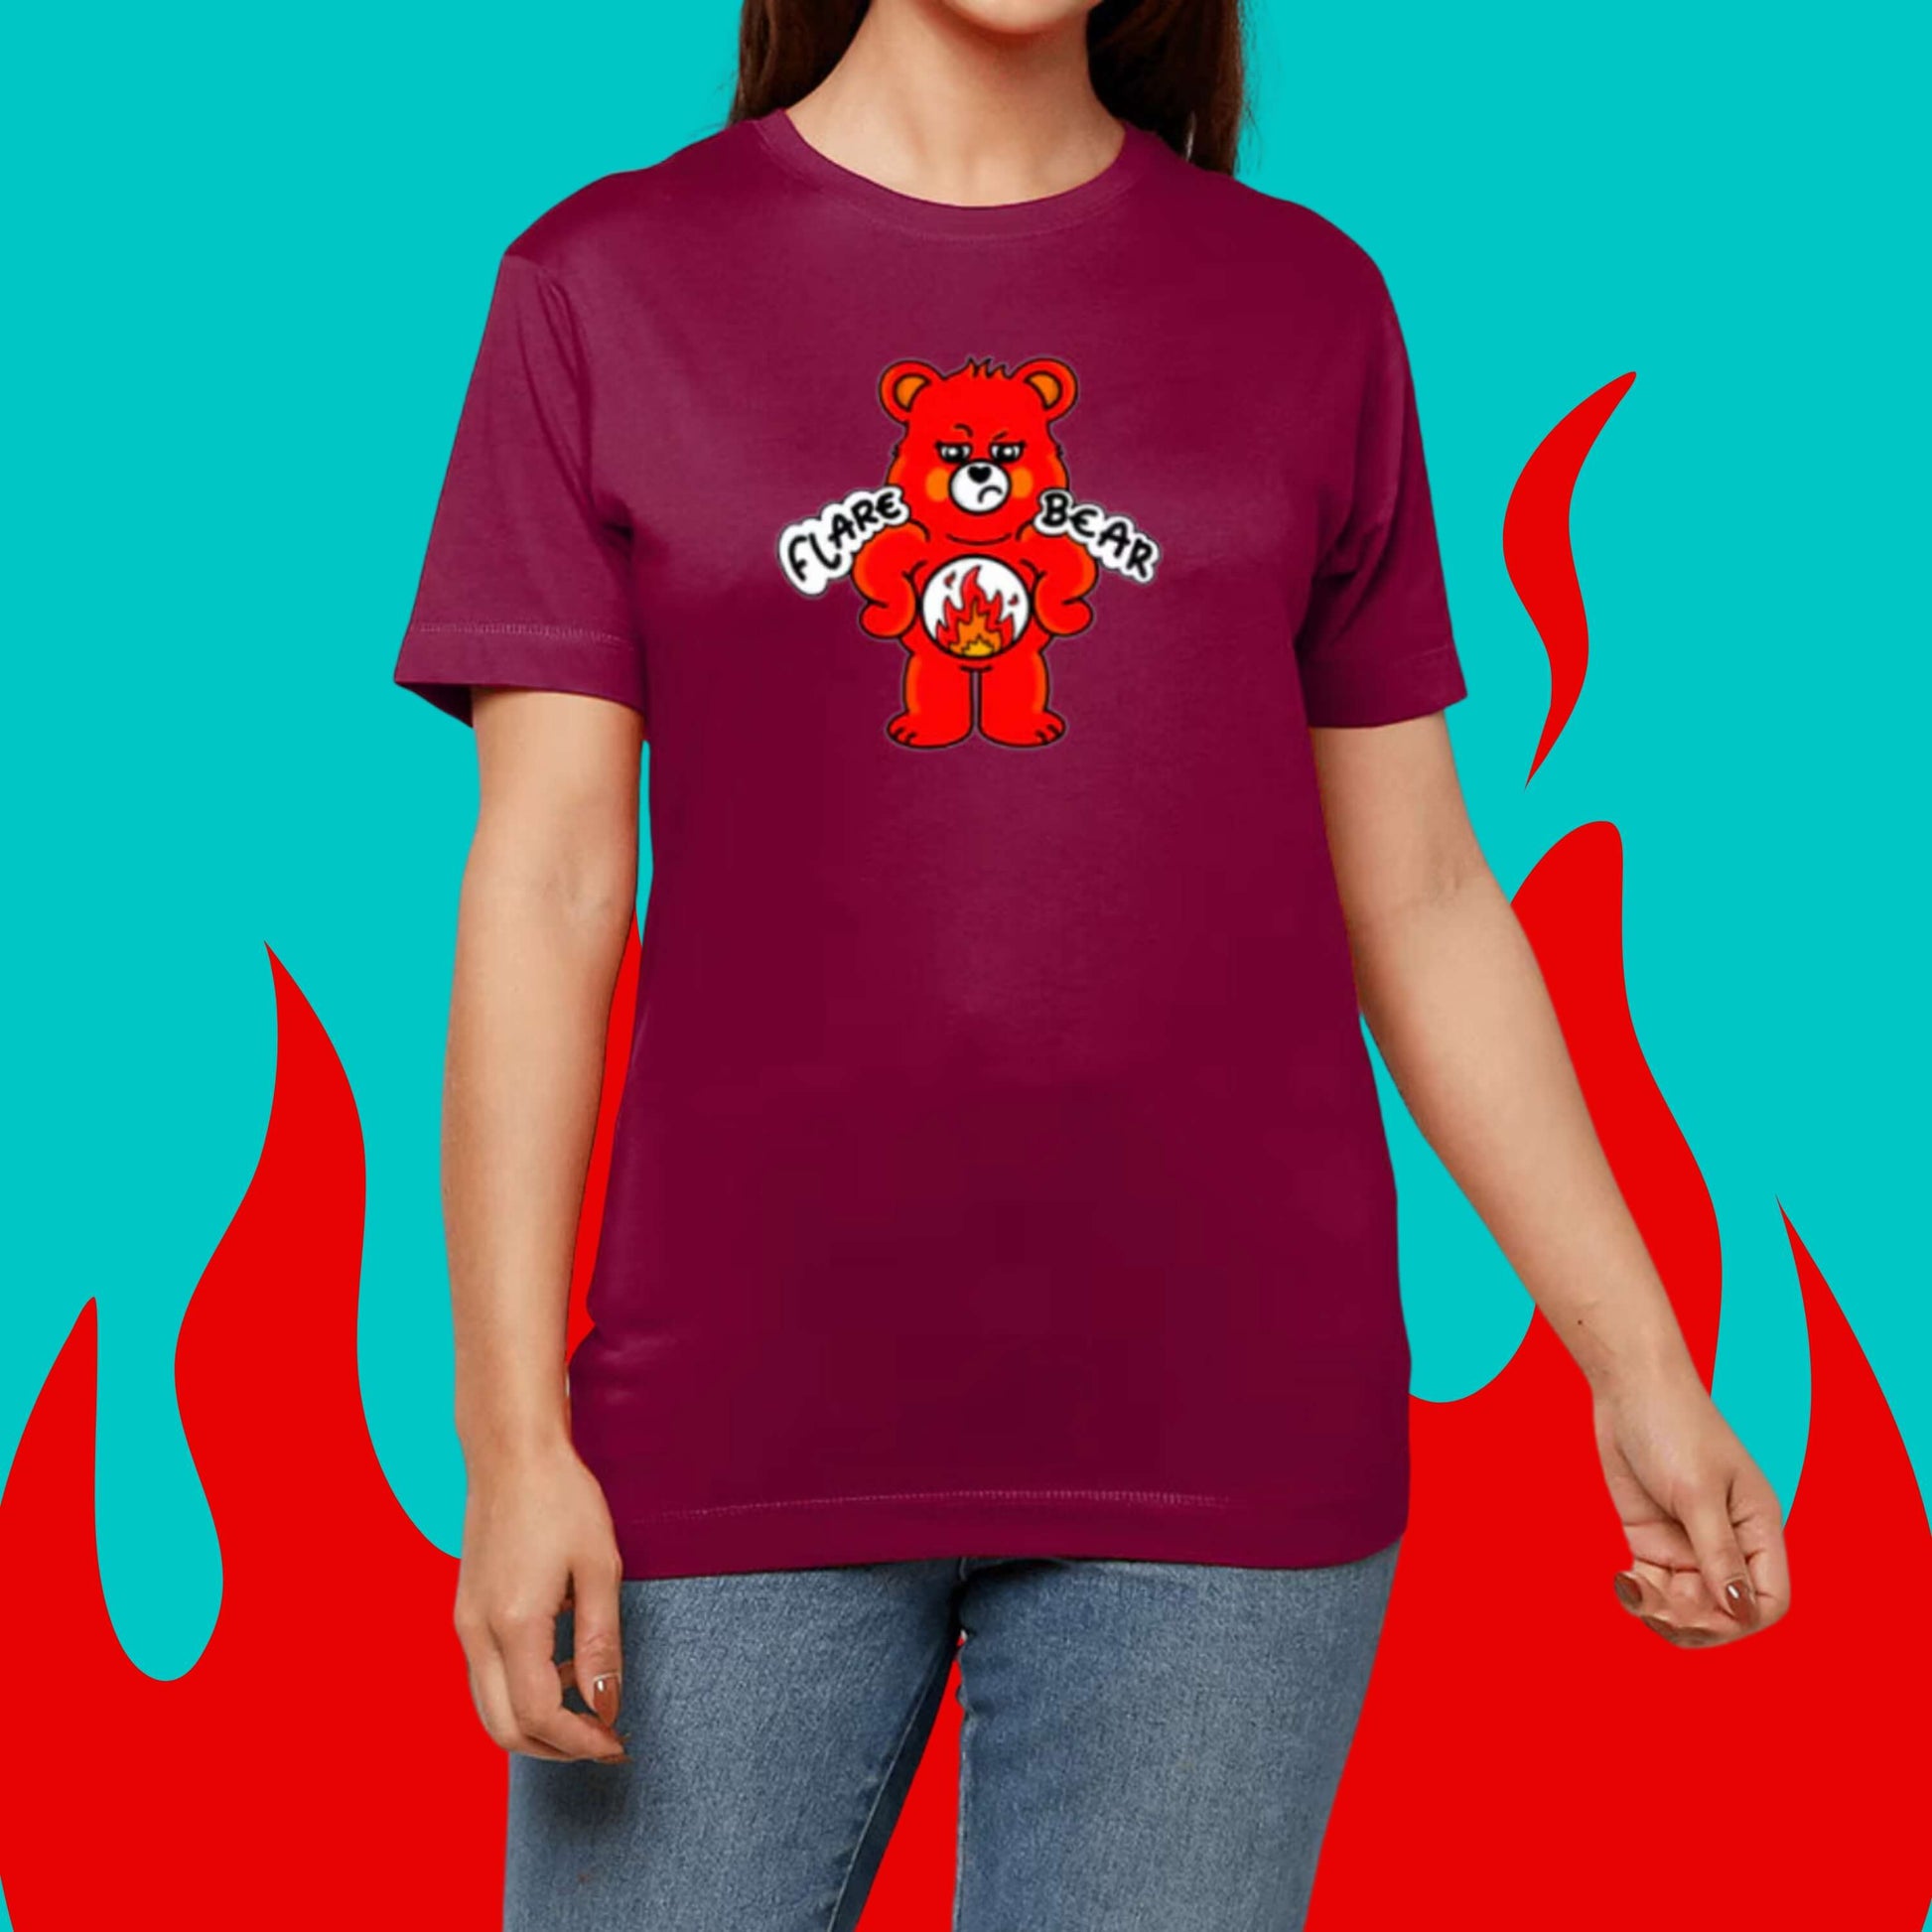 Flare Bear T-shirt being modelled on a blue and red flame background. The cardinal red short sleeve tshirt is of a red bear with a fed up expression and hands on its hips. There is a white circle on its belly with flames inside. Flare Bear is written on the middle. The tshirt is designed to raise awareness for chronic illness flare ups.